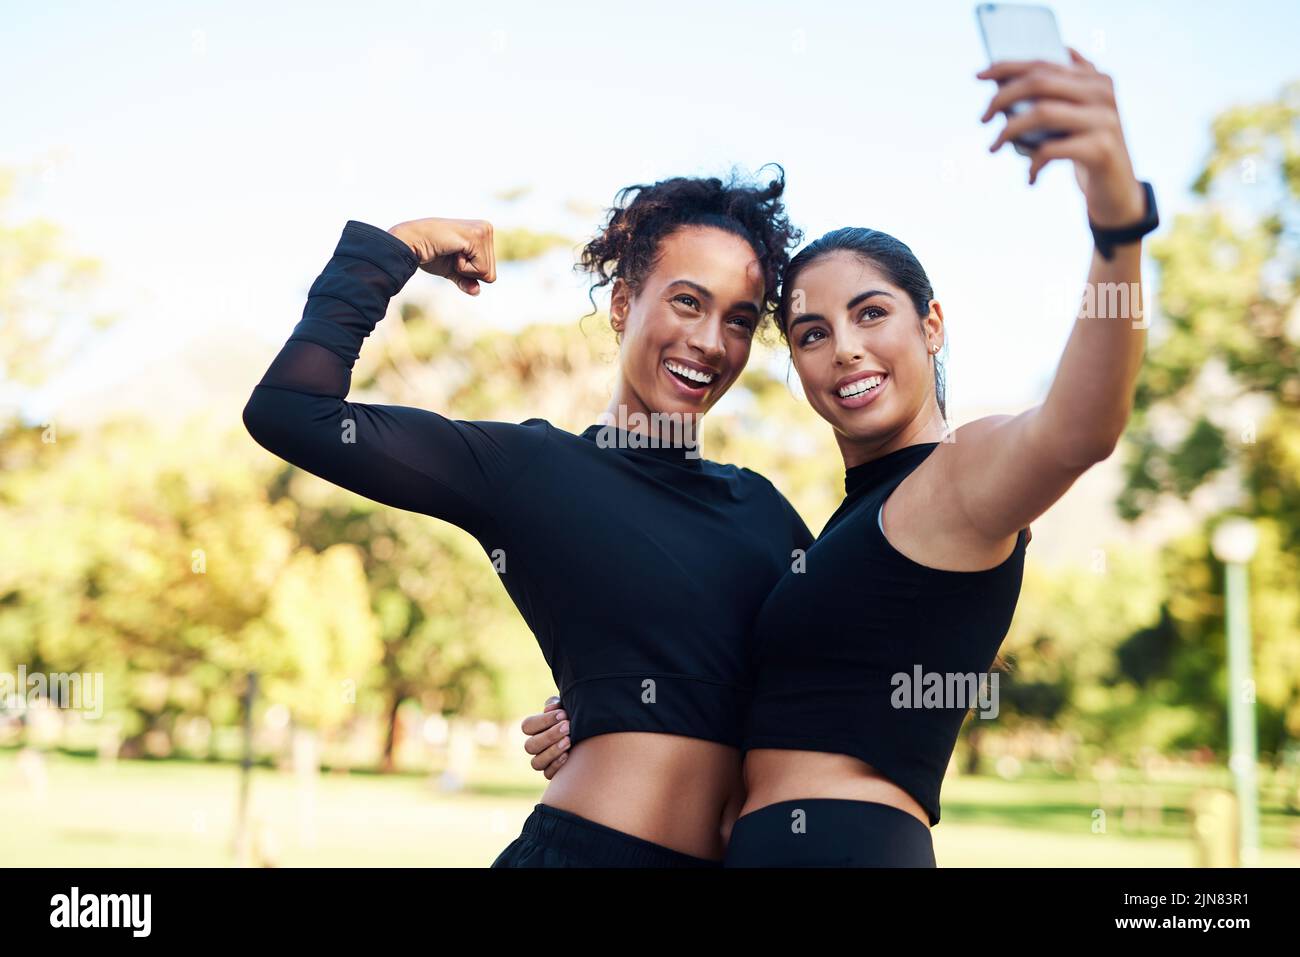 We made it. Cropped portrait of two attractive young women posing for a selfie after their run together in the park. Stock Photo